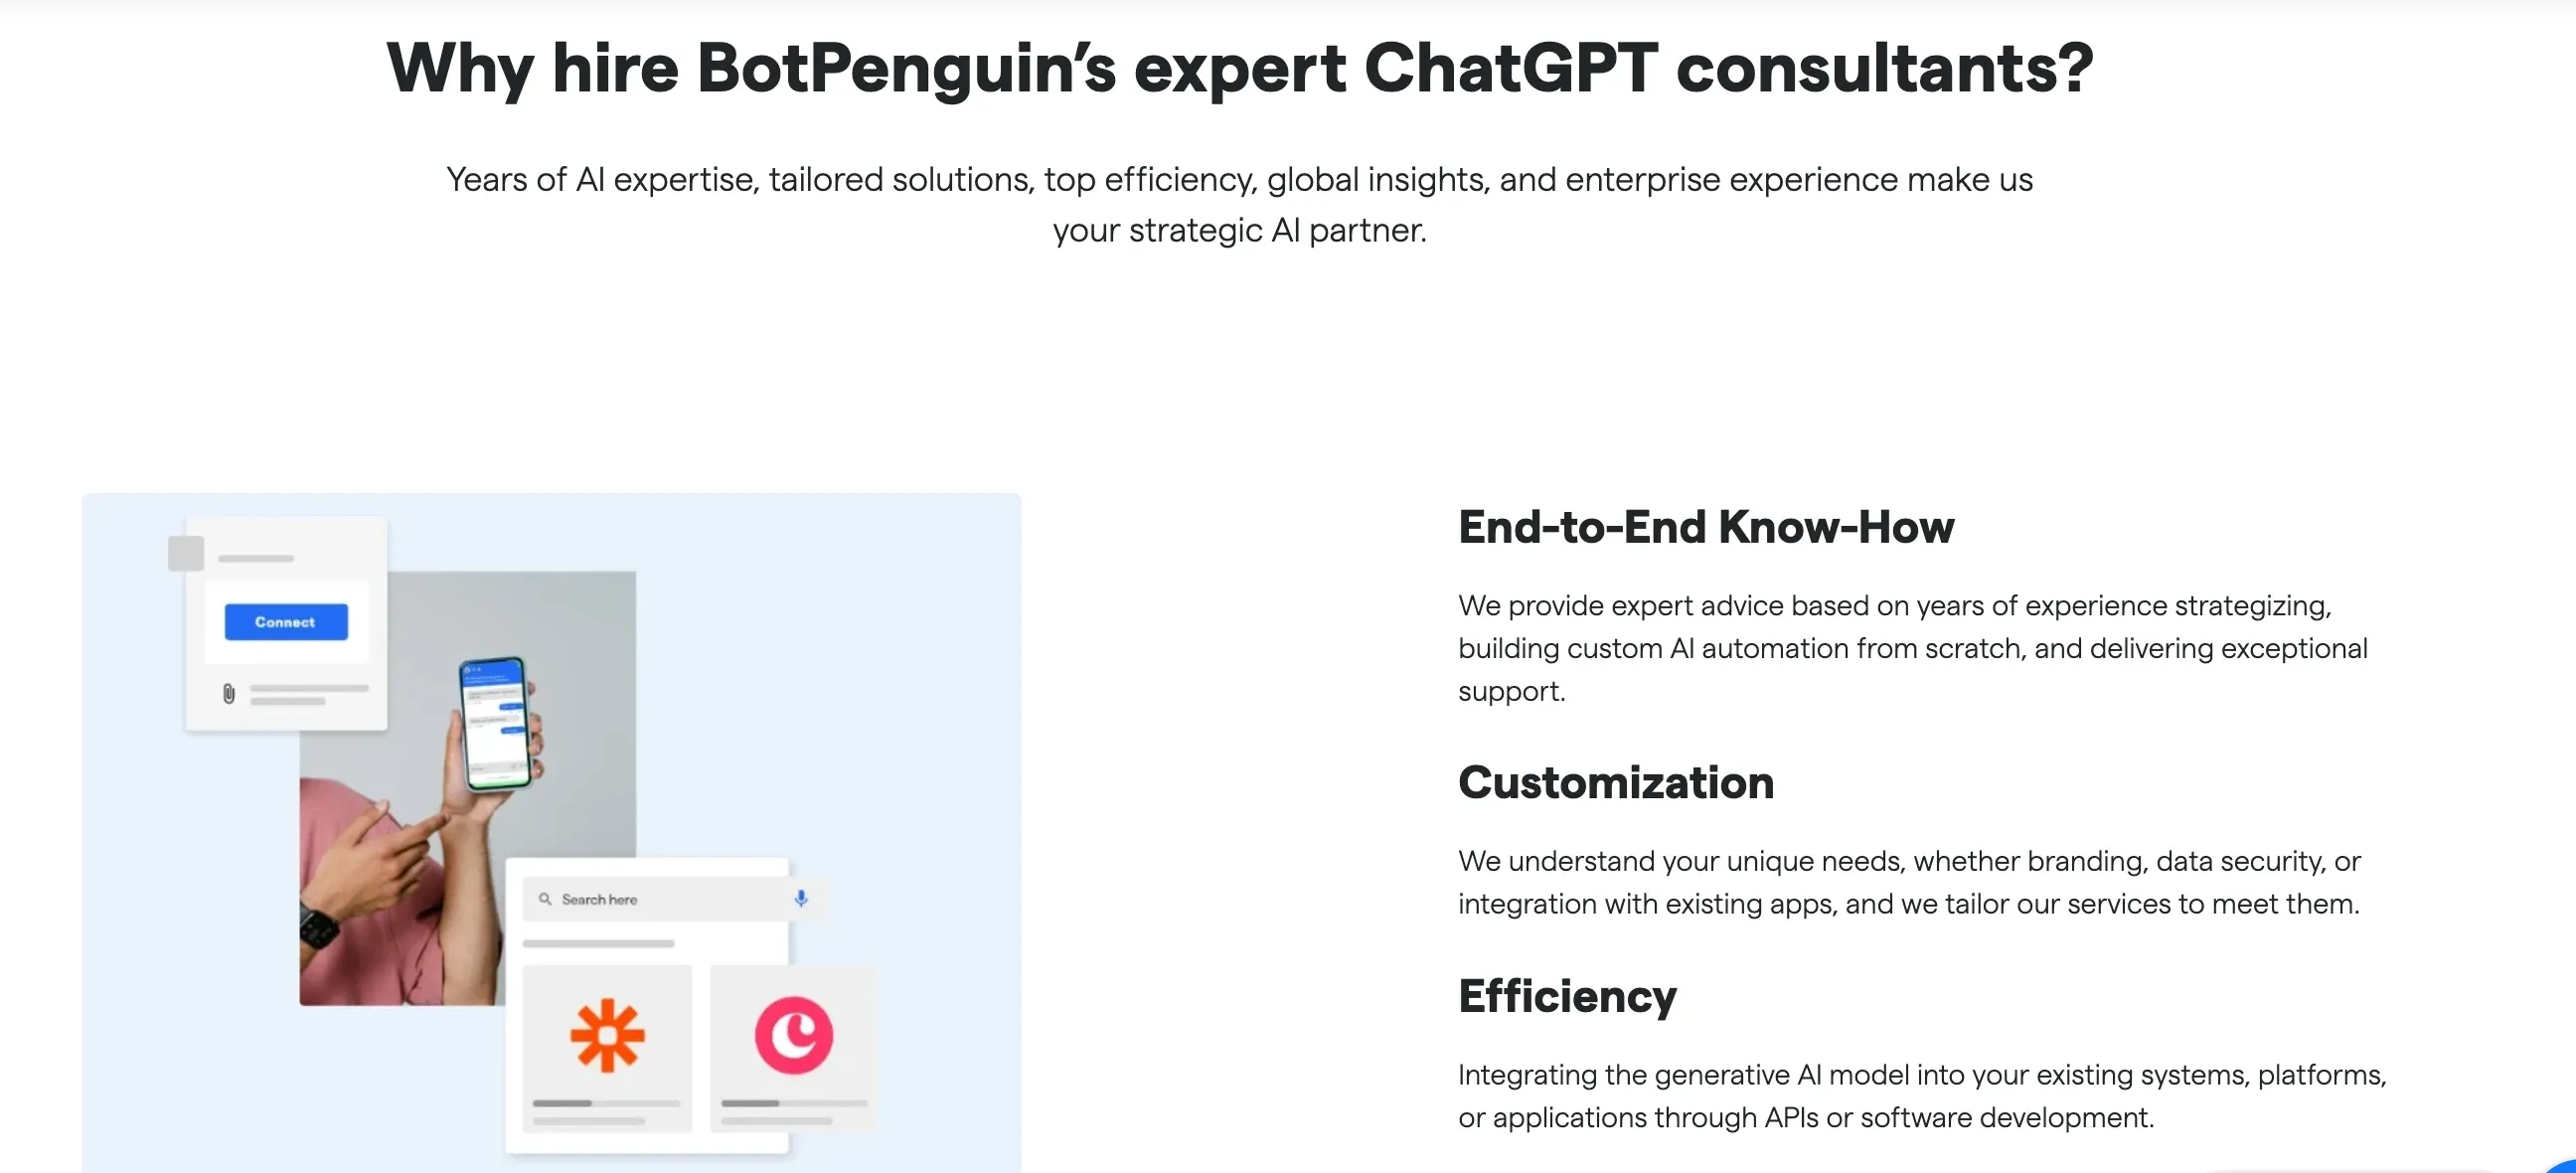 Why Choose BotPenguin's Expert ChatGPT Consultants?